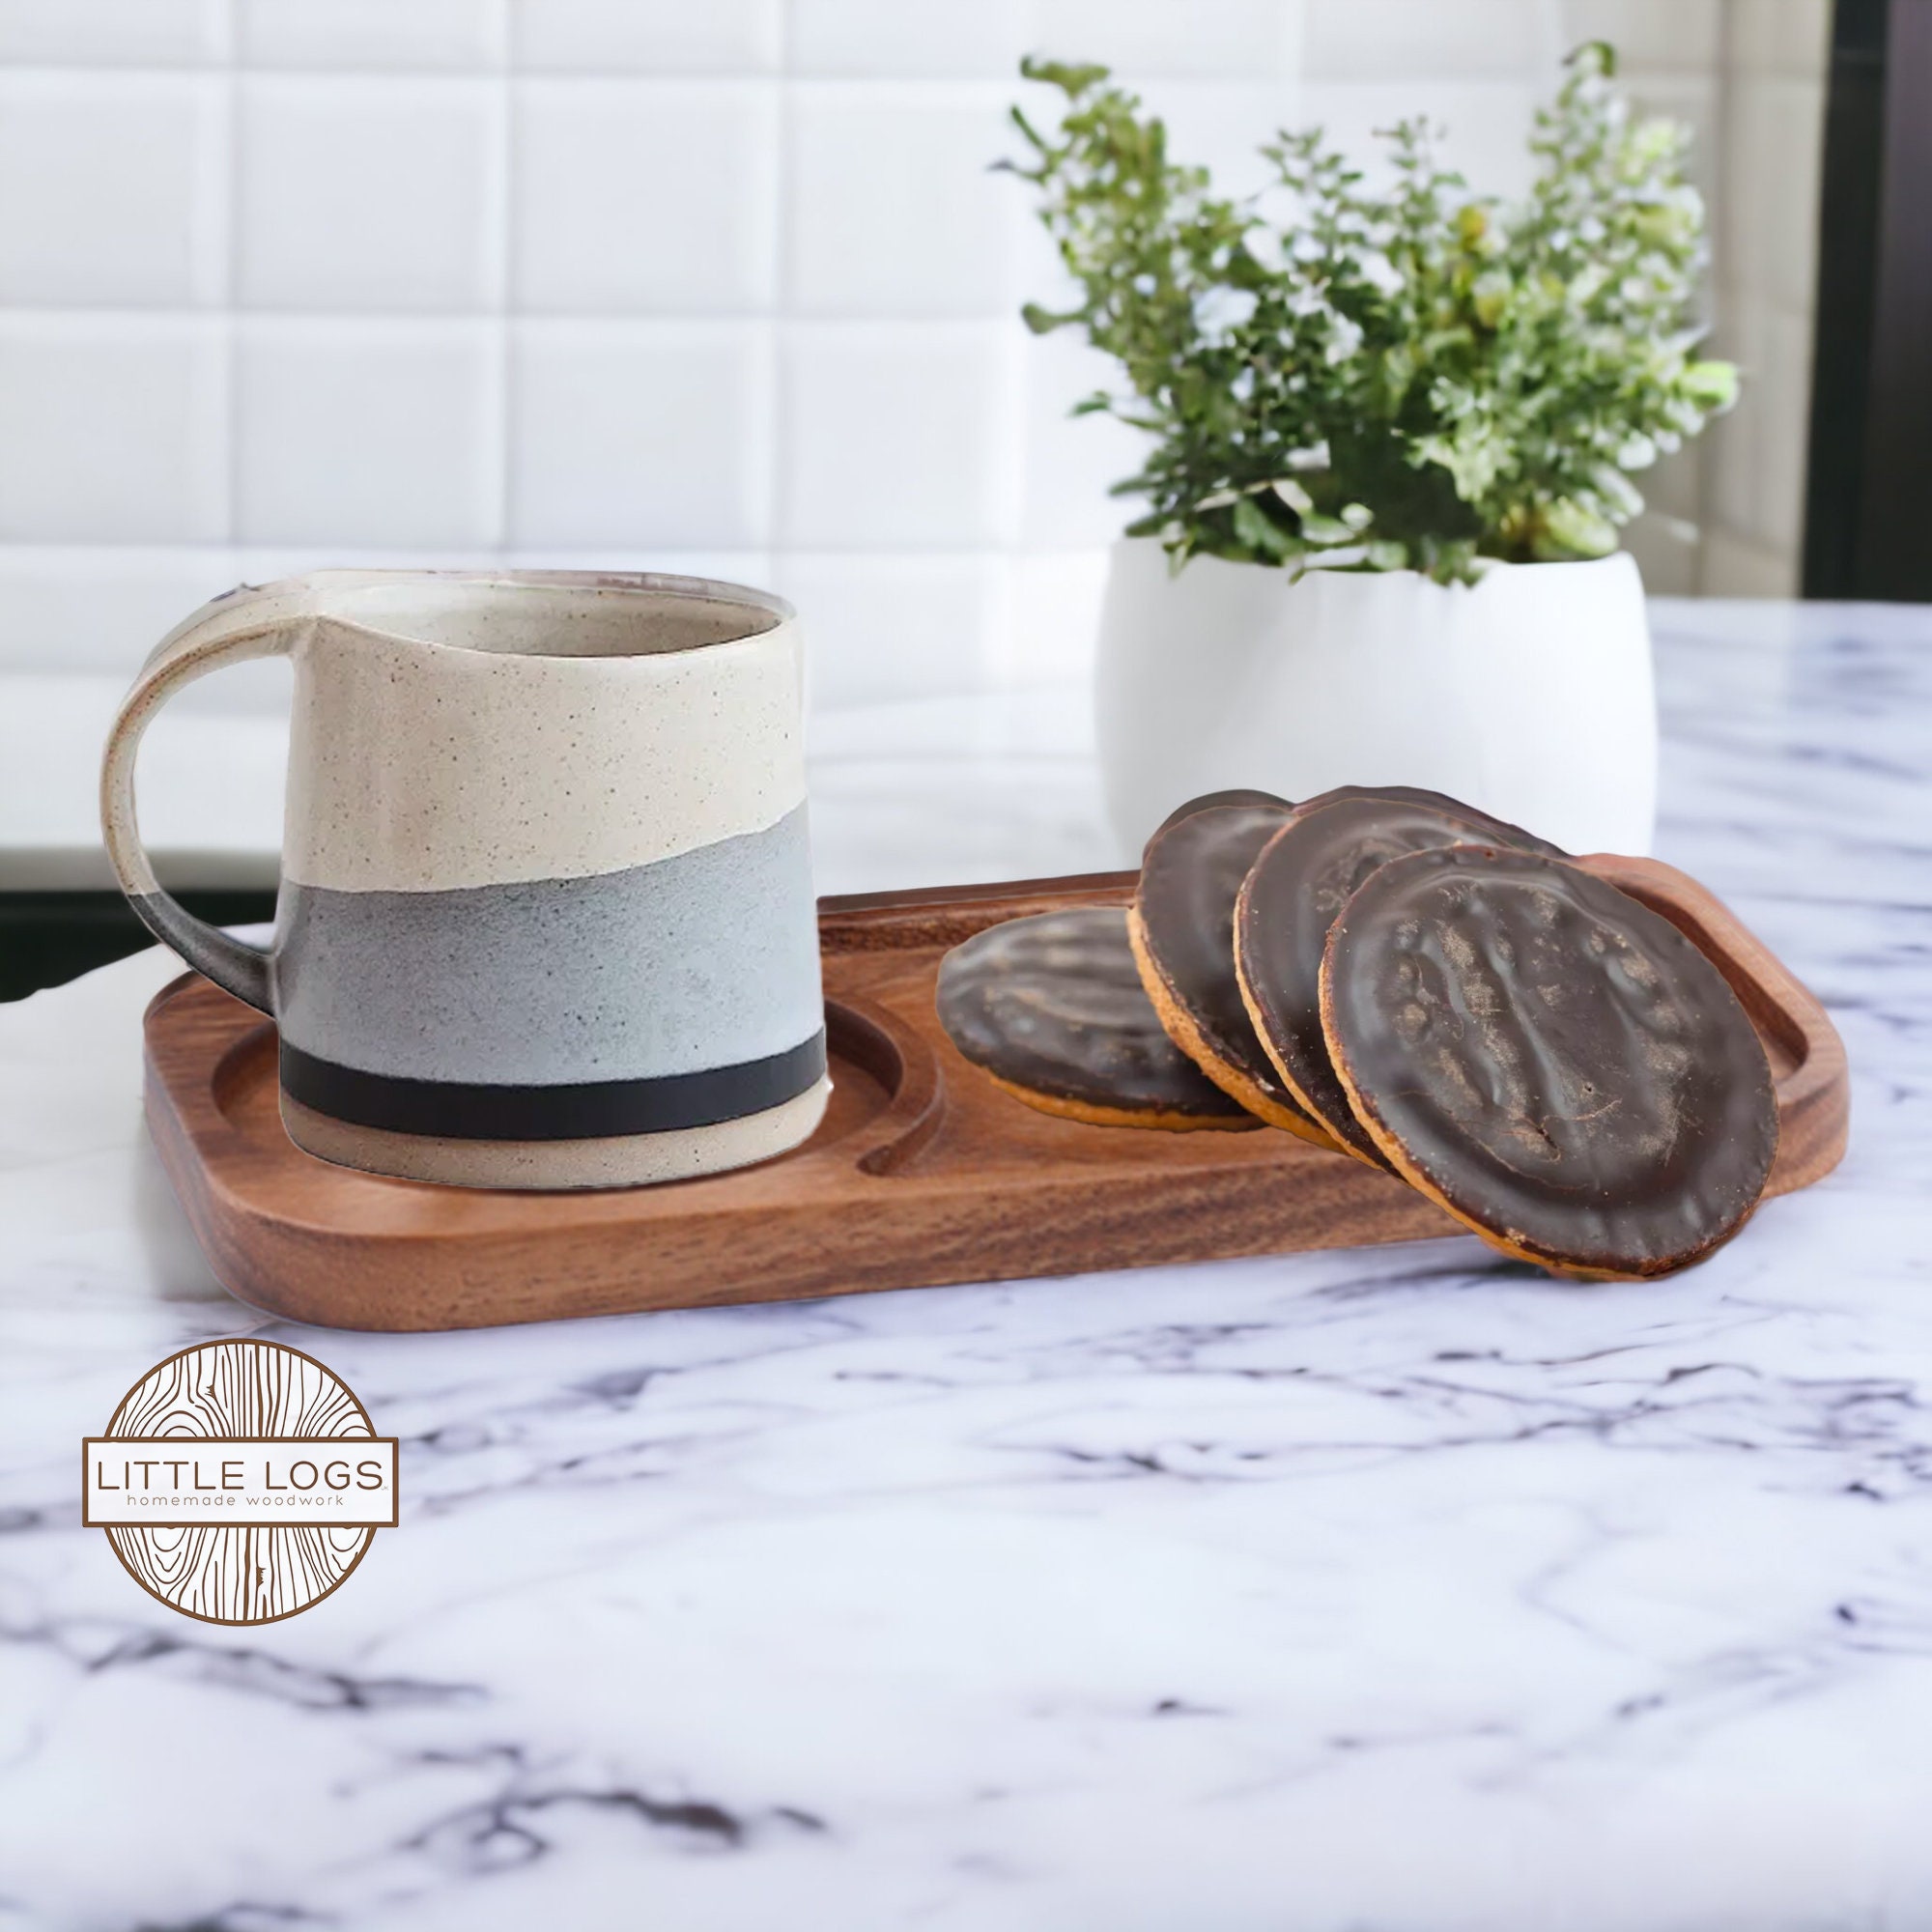 Teak Wood Coffee Cup Tea Cup Natural Wood Smooth Caffeine Addict Present  Drink Nature With Our Handcrafted Wooden Coffee Set 